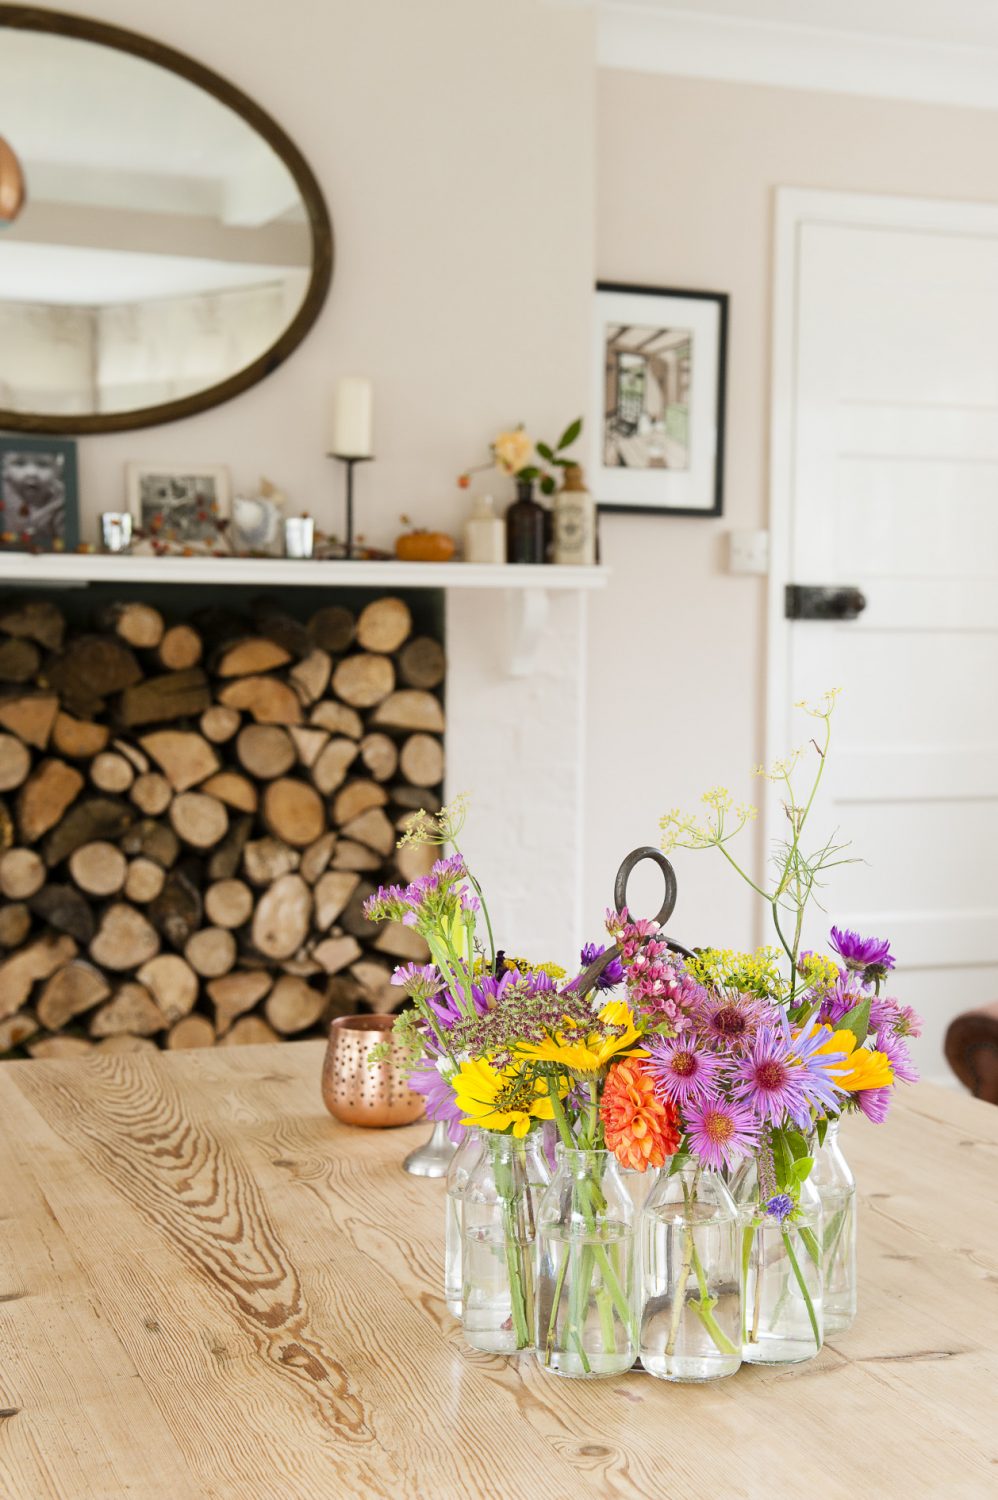 There is no shortage of flowers for the dining table in this cottage